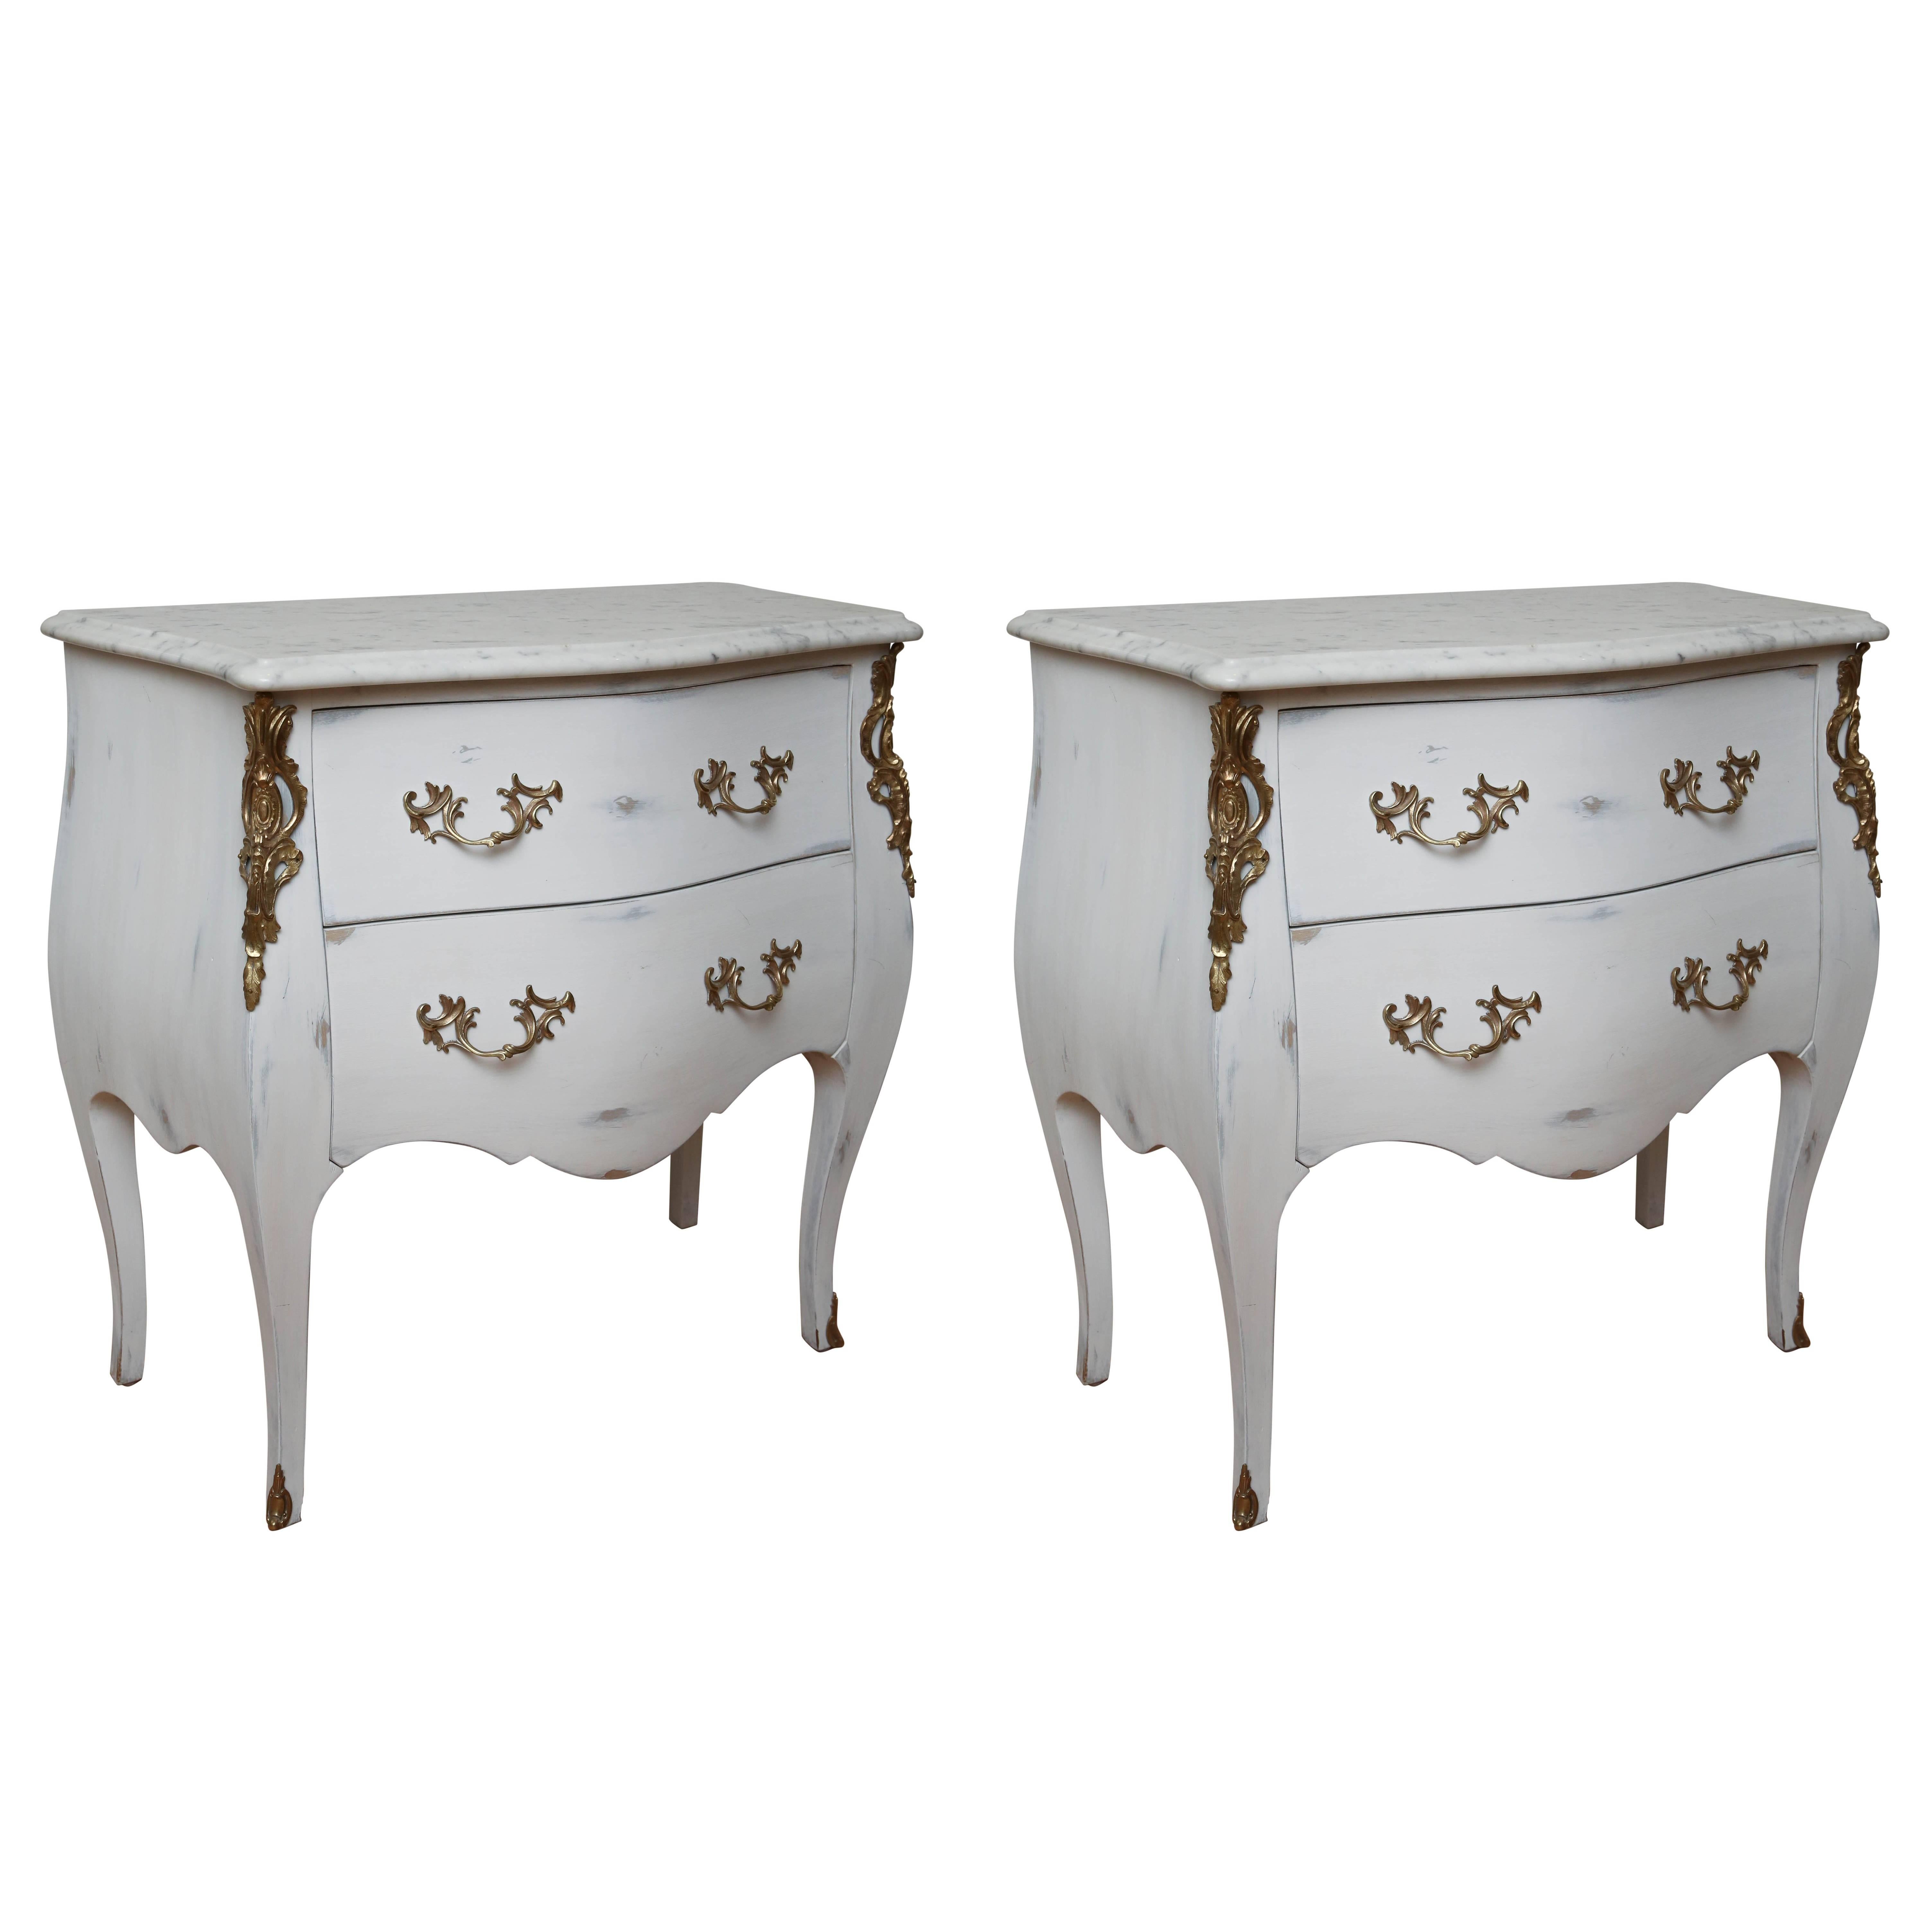 Pair of Vintage Auffray Painted Chests with Marble Tops